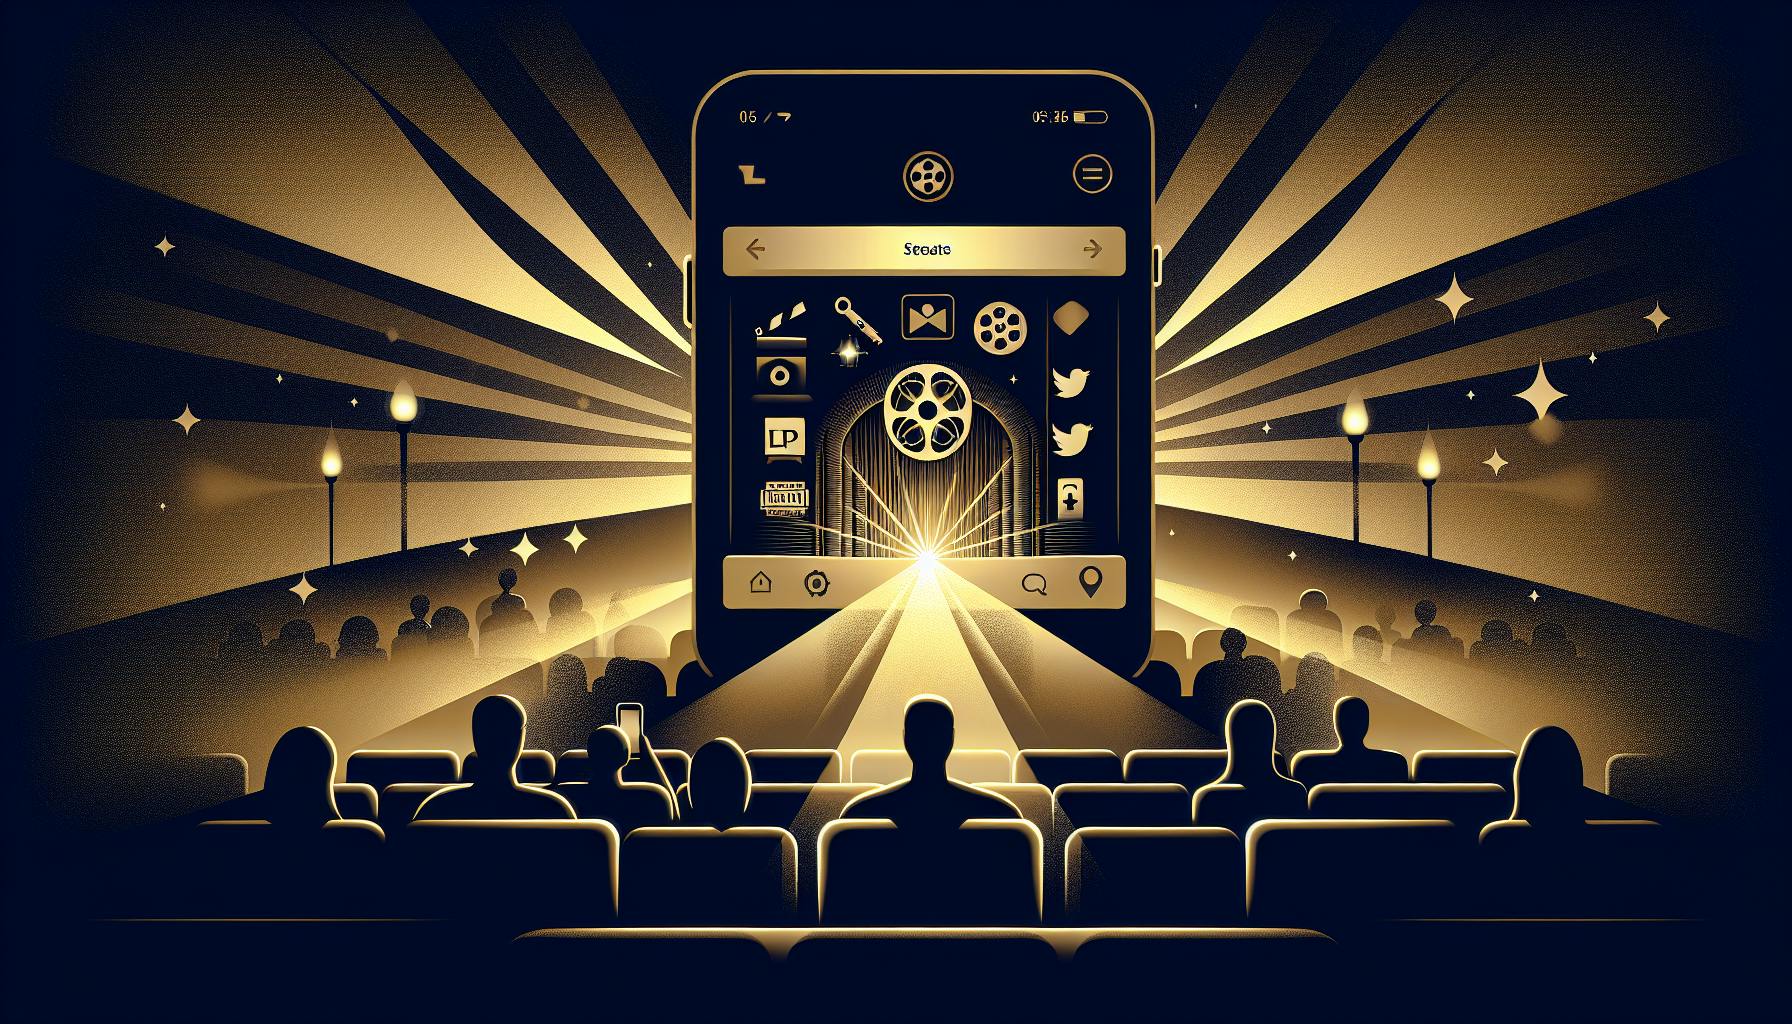 Best Cinema Experience: Custom Apps to Connect with Moviegoers